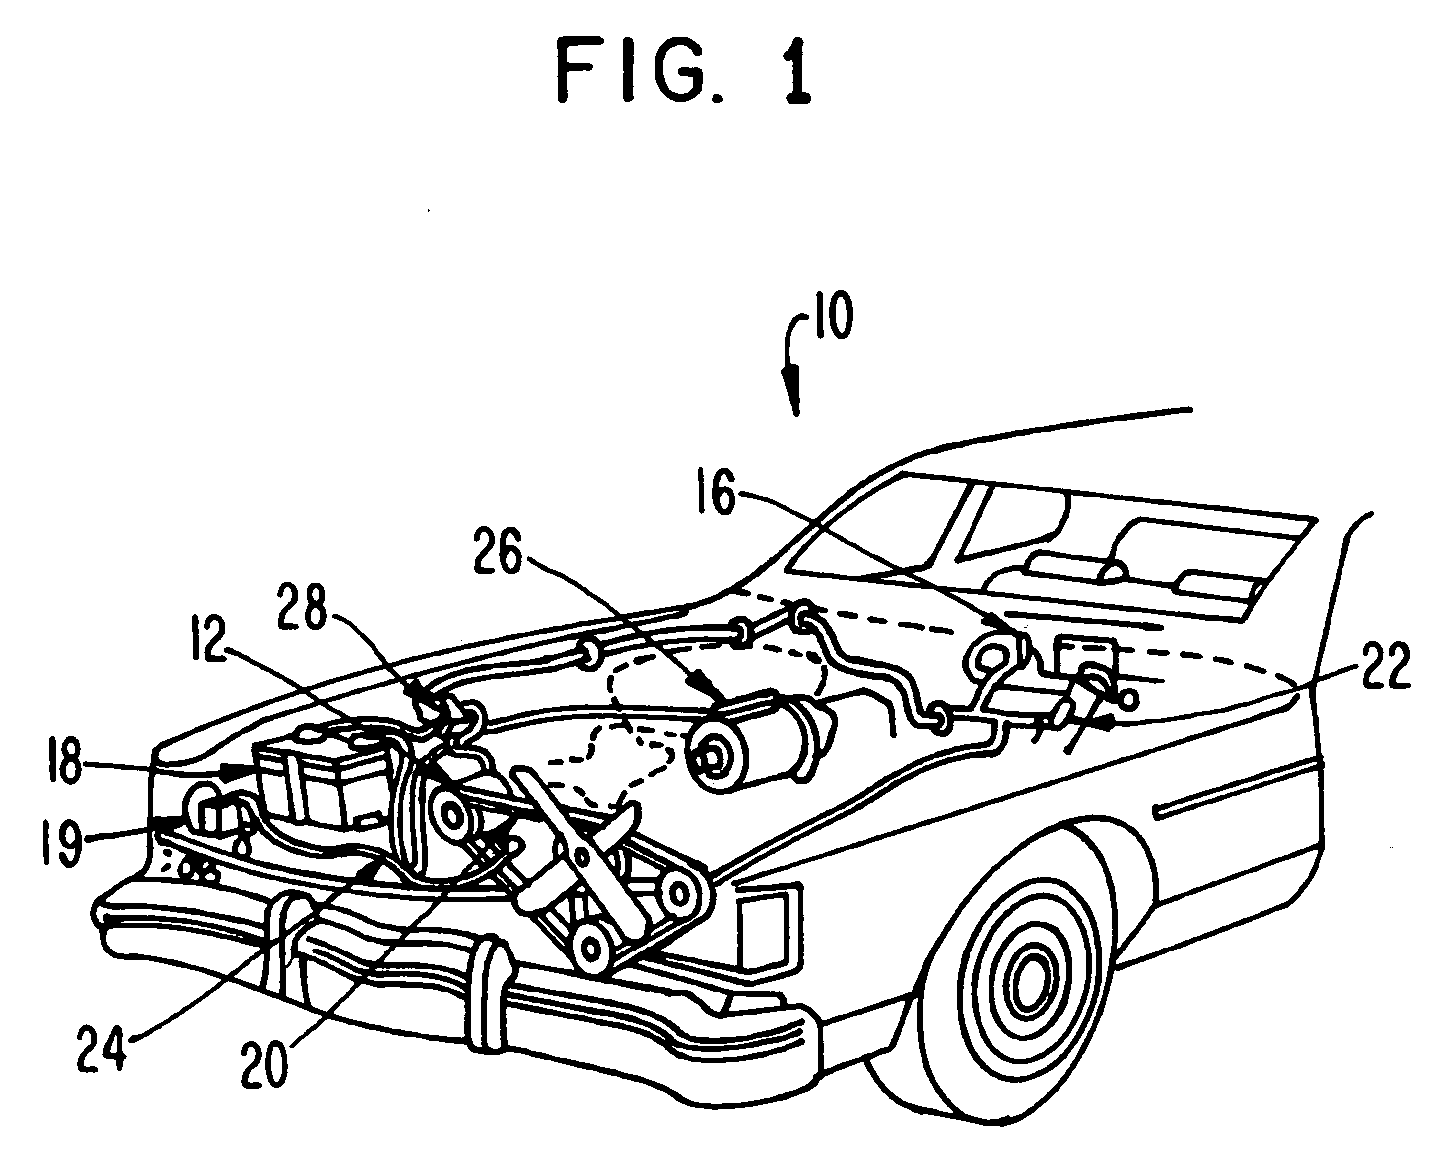 Testing apparatus and method for vehicle starting and charging system